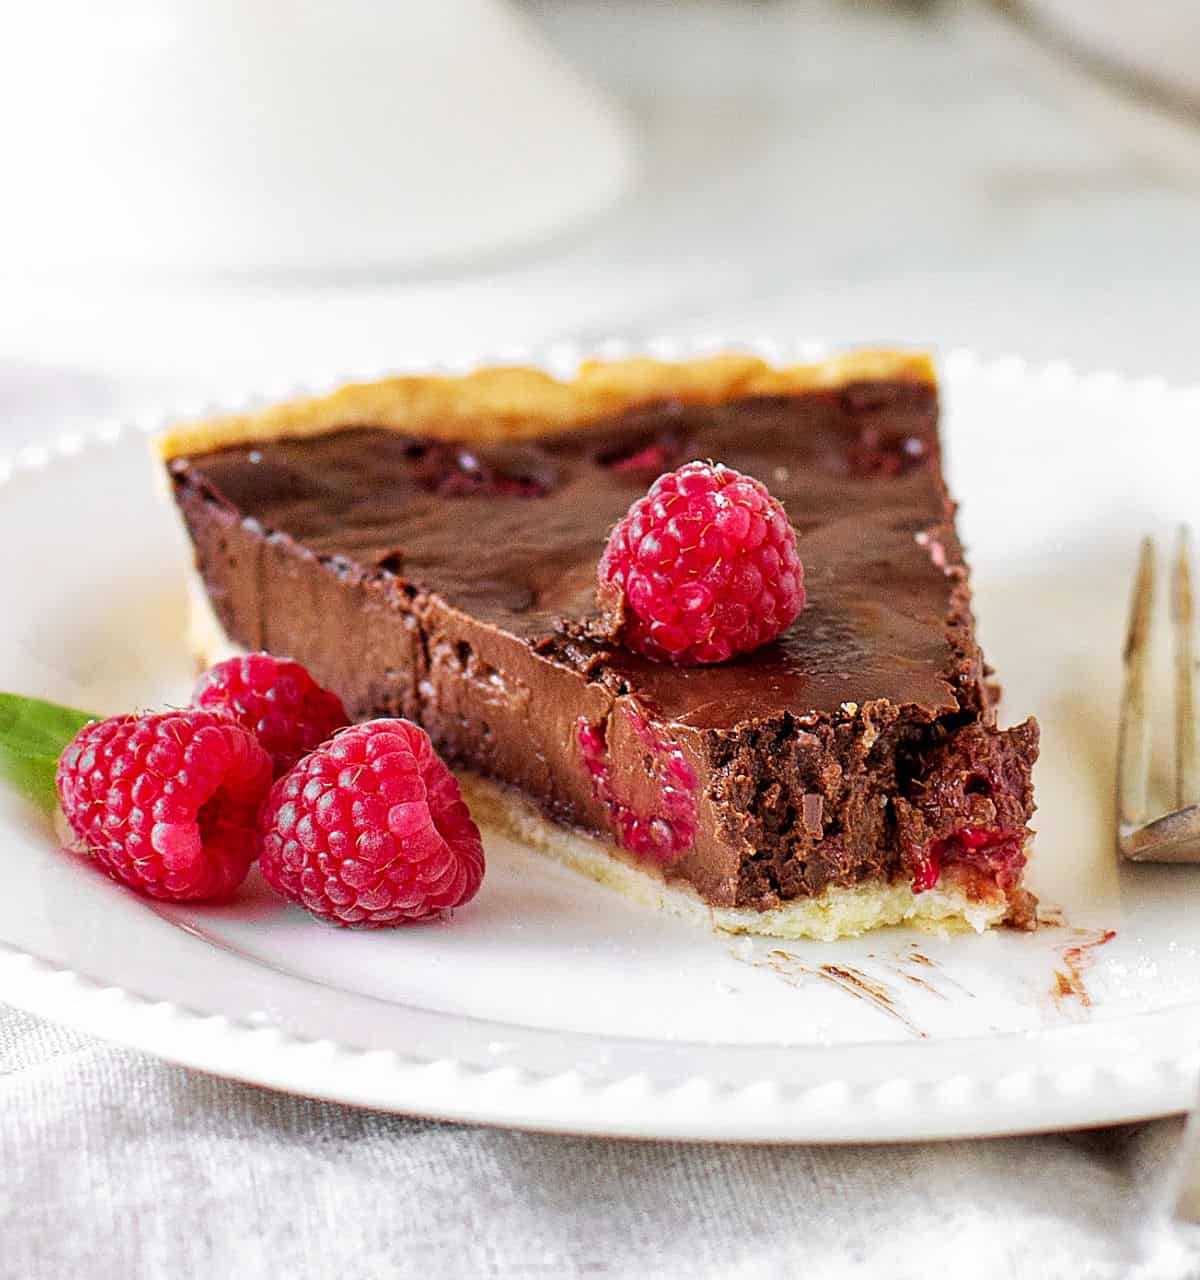 Slice of chocolate raspberry tart with missing bite, on white plate, silver fork.